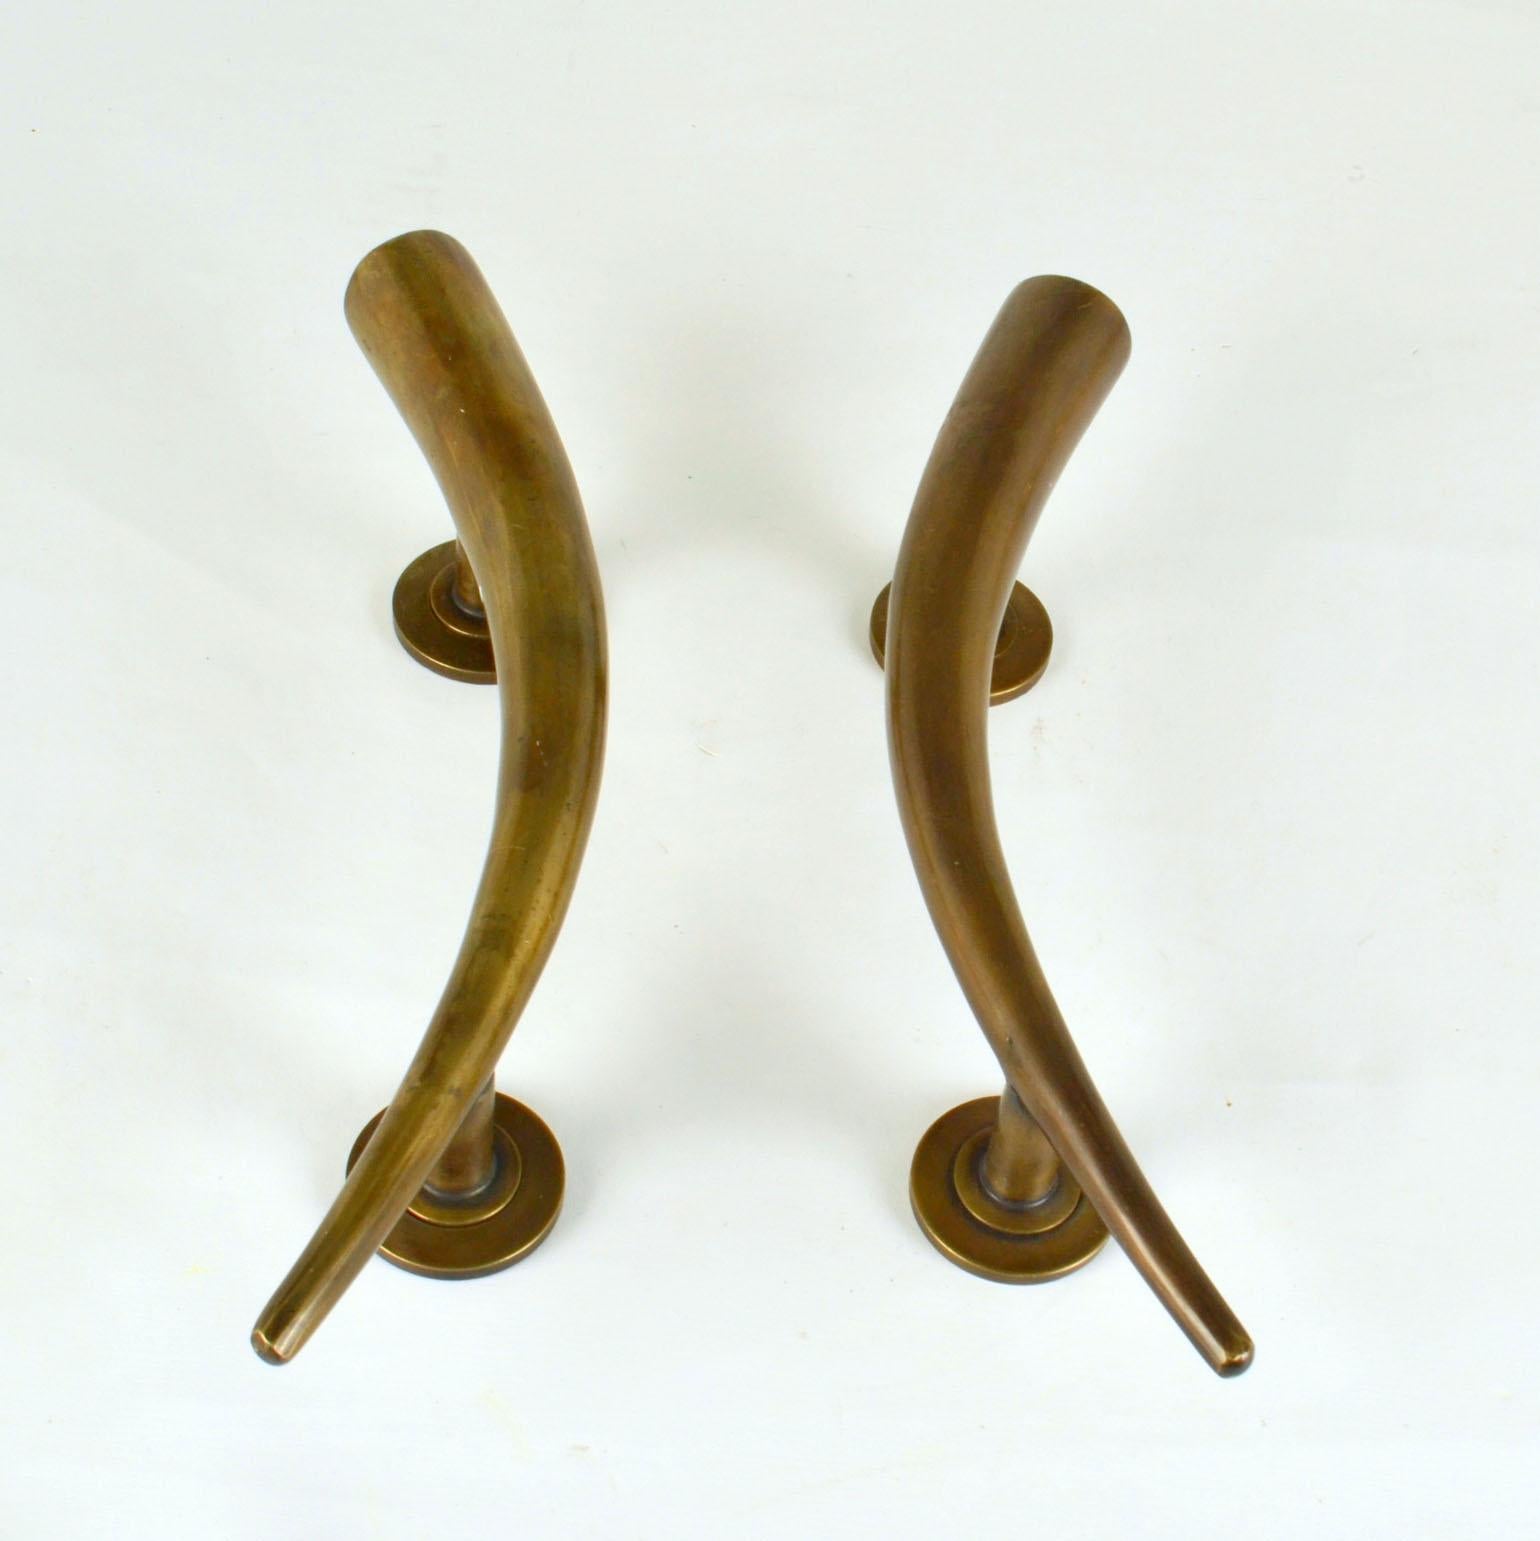 Pair of Art Deco bronze cast push and pull door handles shaped like a horn. The original patina on a smooth surface of these sculptural door handles adds to its age.
They will work inside or outside any contemporary building today. They can be used